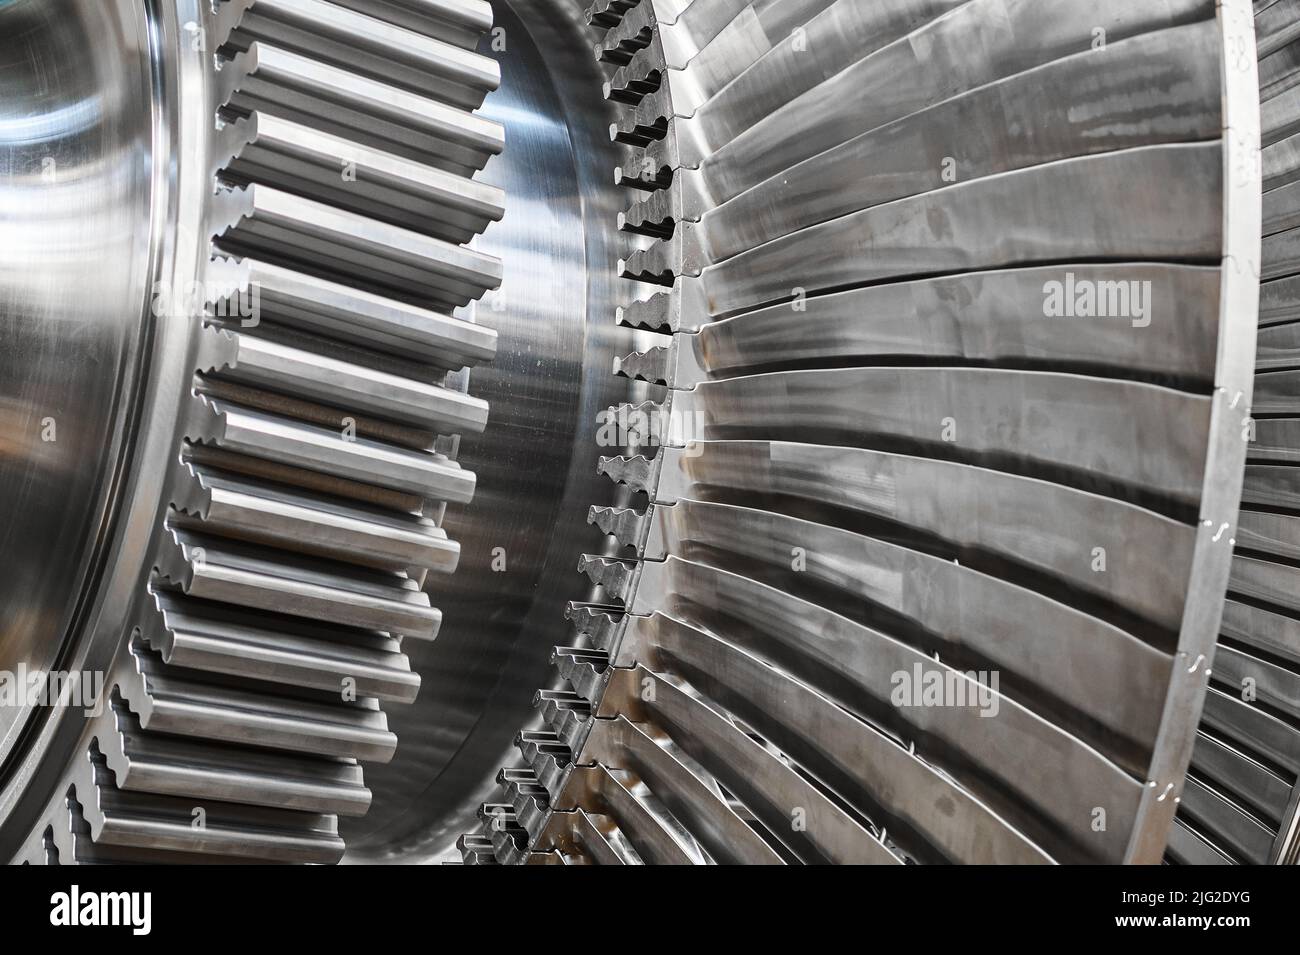 Rotor Of A Steam Turbine Stock Photo - Download Image Now